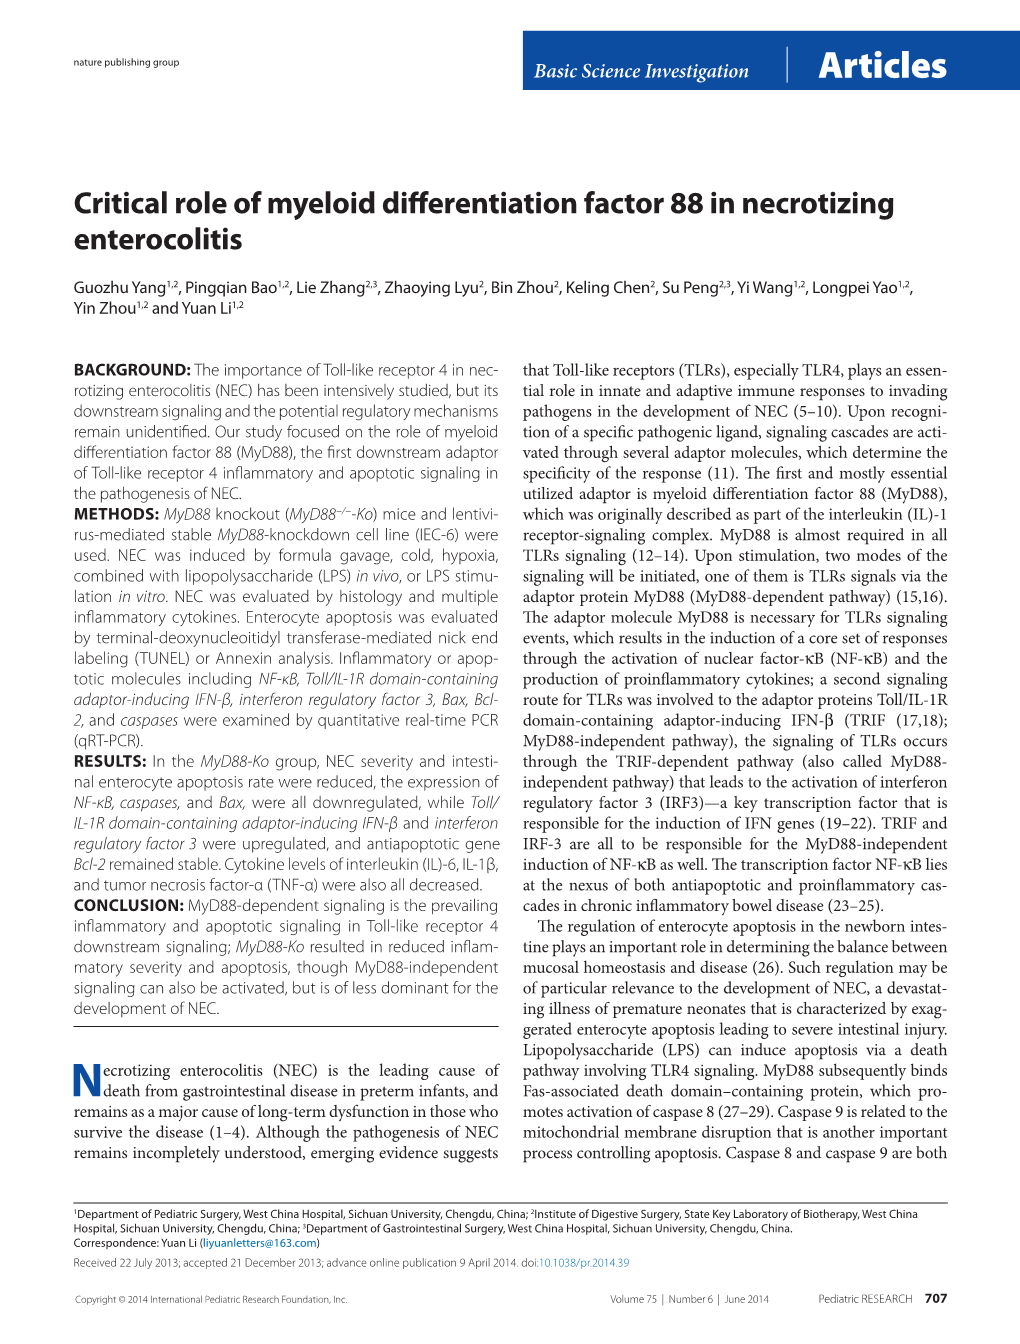 Critical Role of Myeloid Differentiation Factor 88 in Necrotizing Enterocolitis